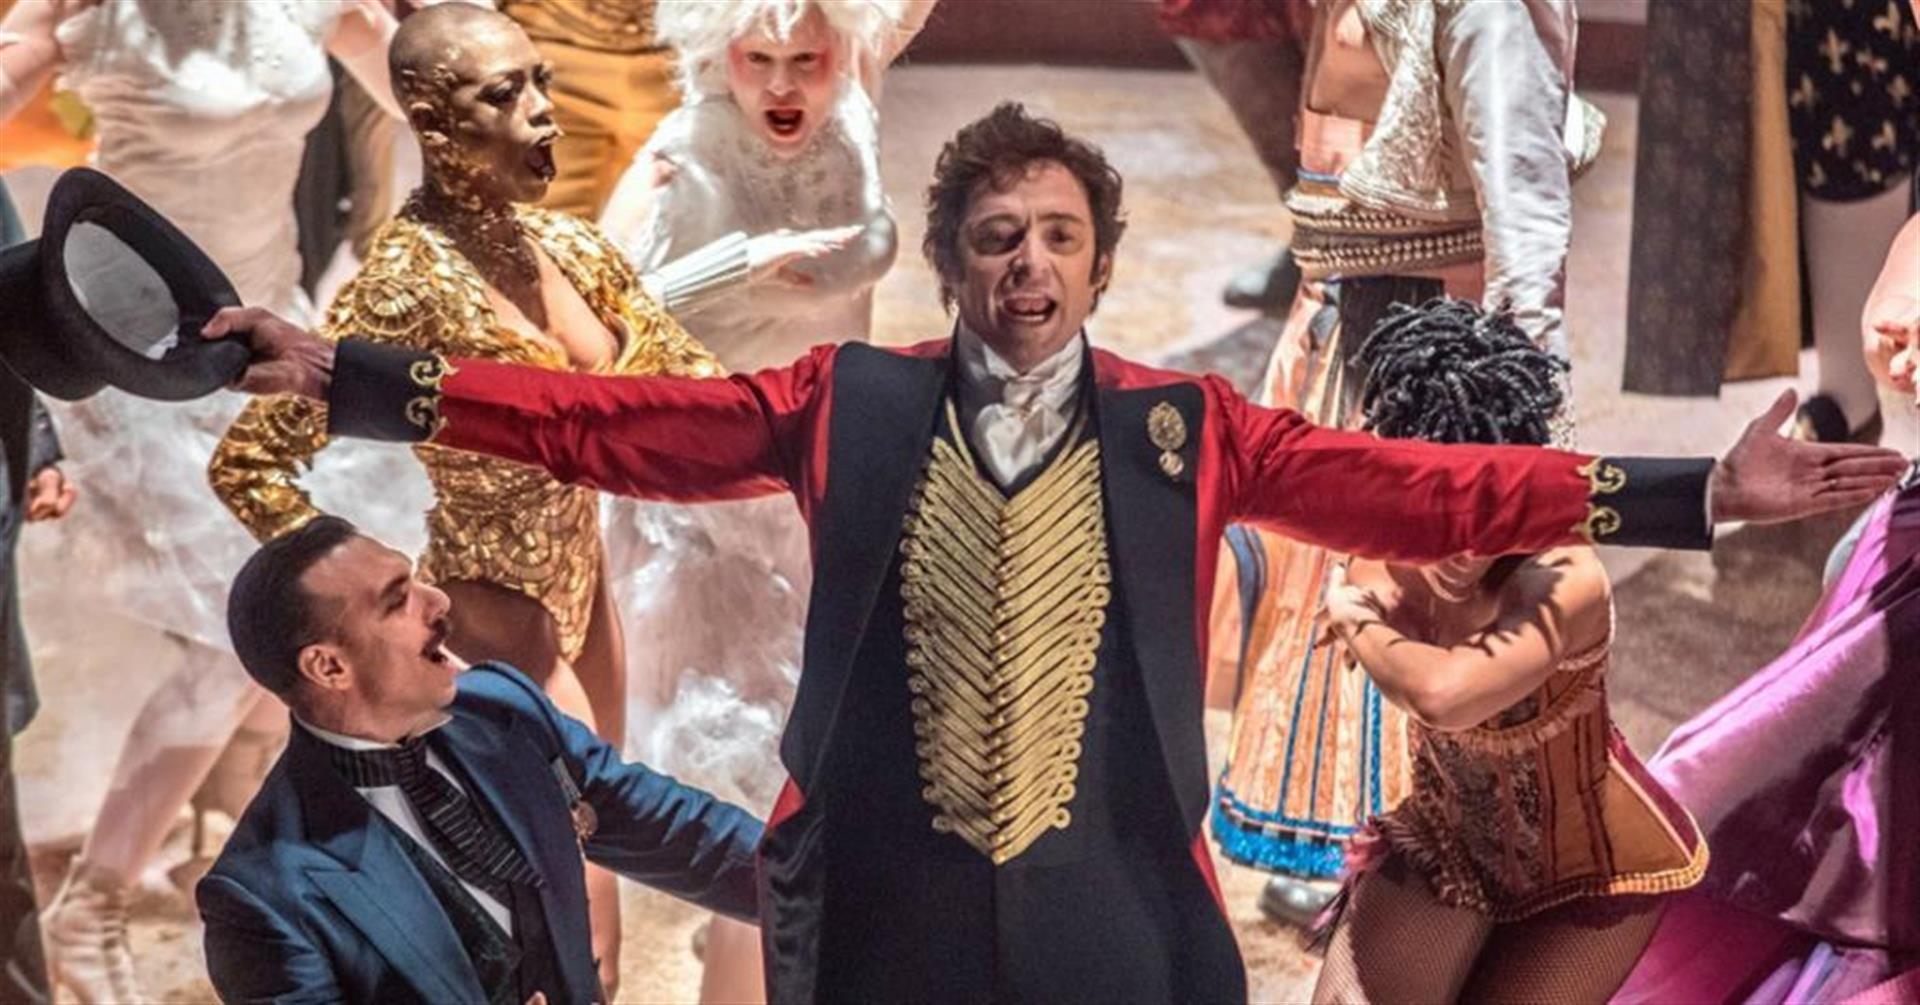 Lowther Drive In Cinema: The Greatest Showman (PG) - Lowther Pavilion